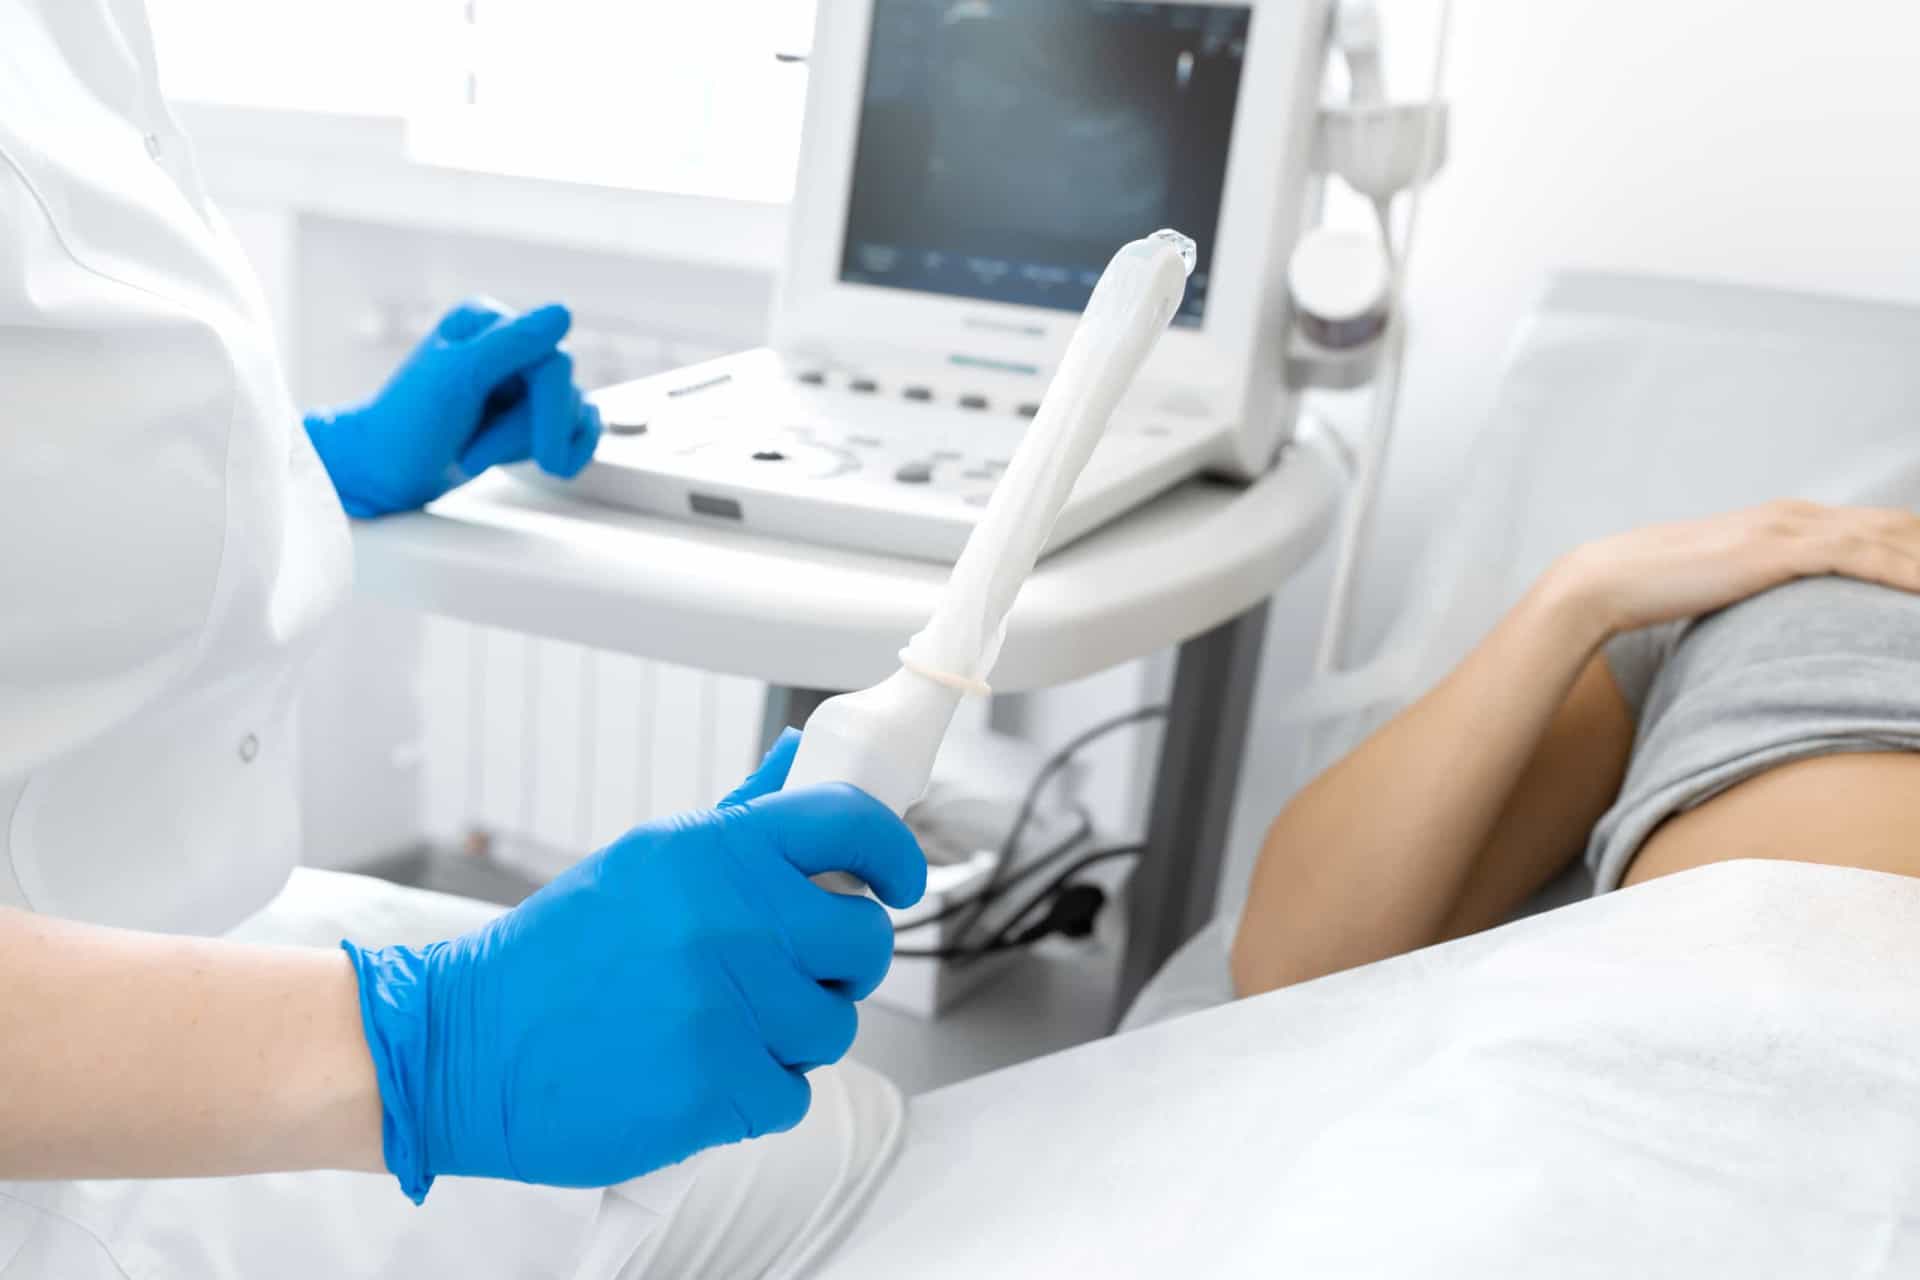 <p>A transvaginal ultrasound is used to collect images of a woman’s ovaries and uterus, which can be useful not only for the detection of ovarian cancer, but also for endometrial cancer.</p><p><a href="https://www.msn.com/en-us/community/channel/vid-7xx8mnucu55yw63we9va2gwr7uihbxwc68fxqp25x6tg4ftibpra?cvid=94631541bc0f4f89bfd59158d696ad7e">Follow us and access great exclusive content everyday</a></p>